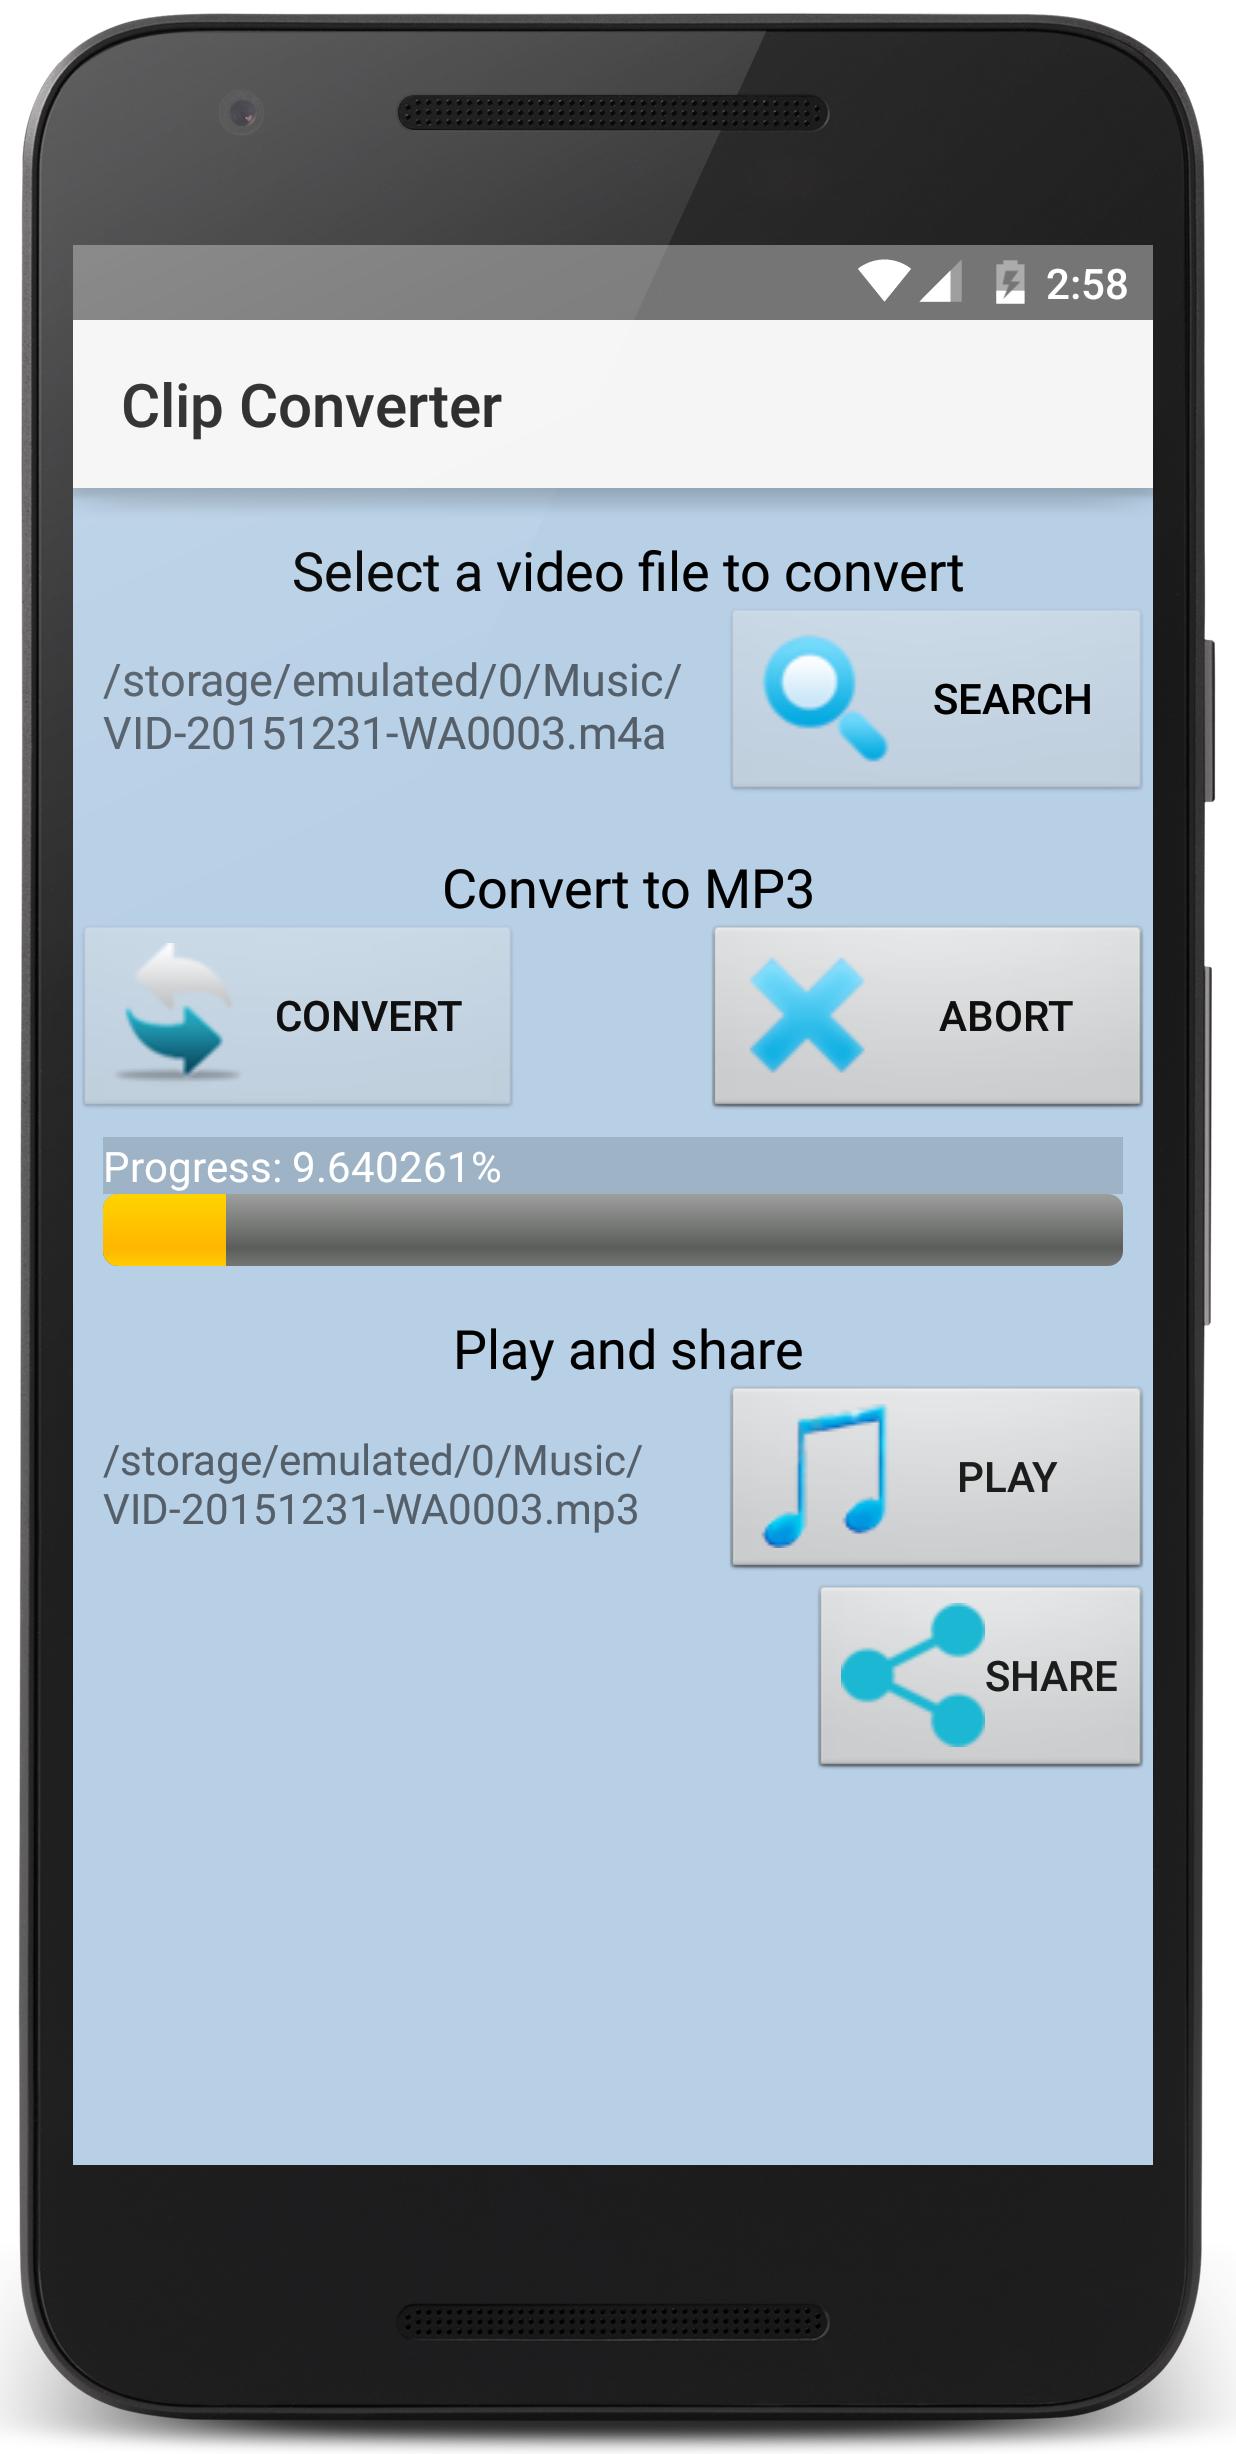 Clip Converter for Android - APK Download